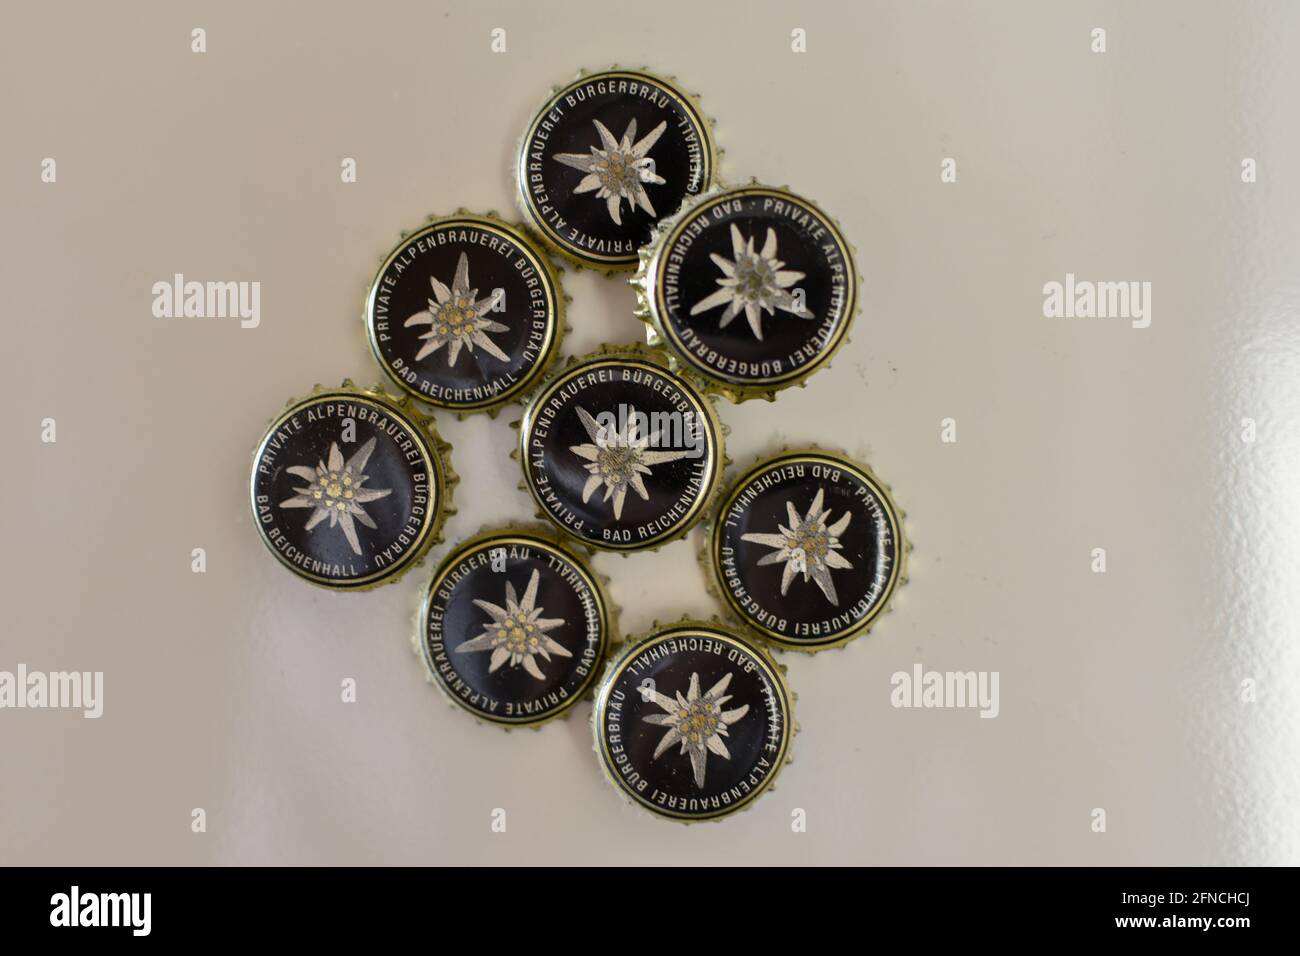 Bad Reichenhall, Germany - May 15, 2021: beer bottle caps of Buergerbraeu Bad Reichenhall brewery with Edelweiss wildflower as decoration Stock Photo